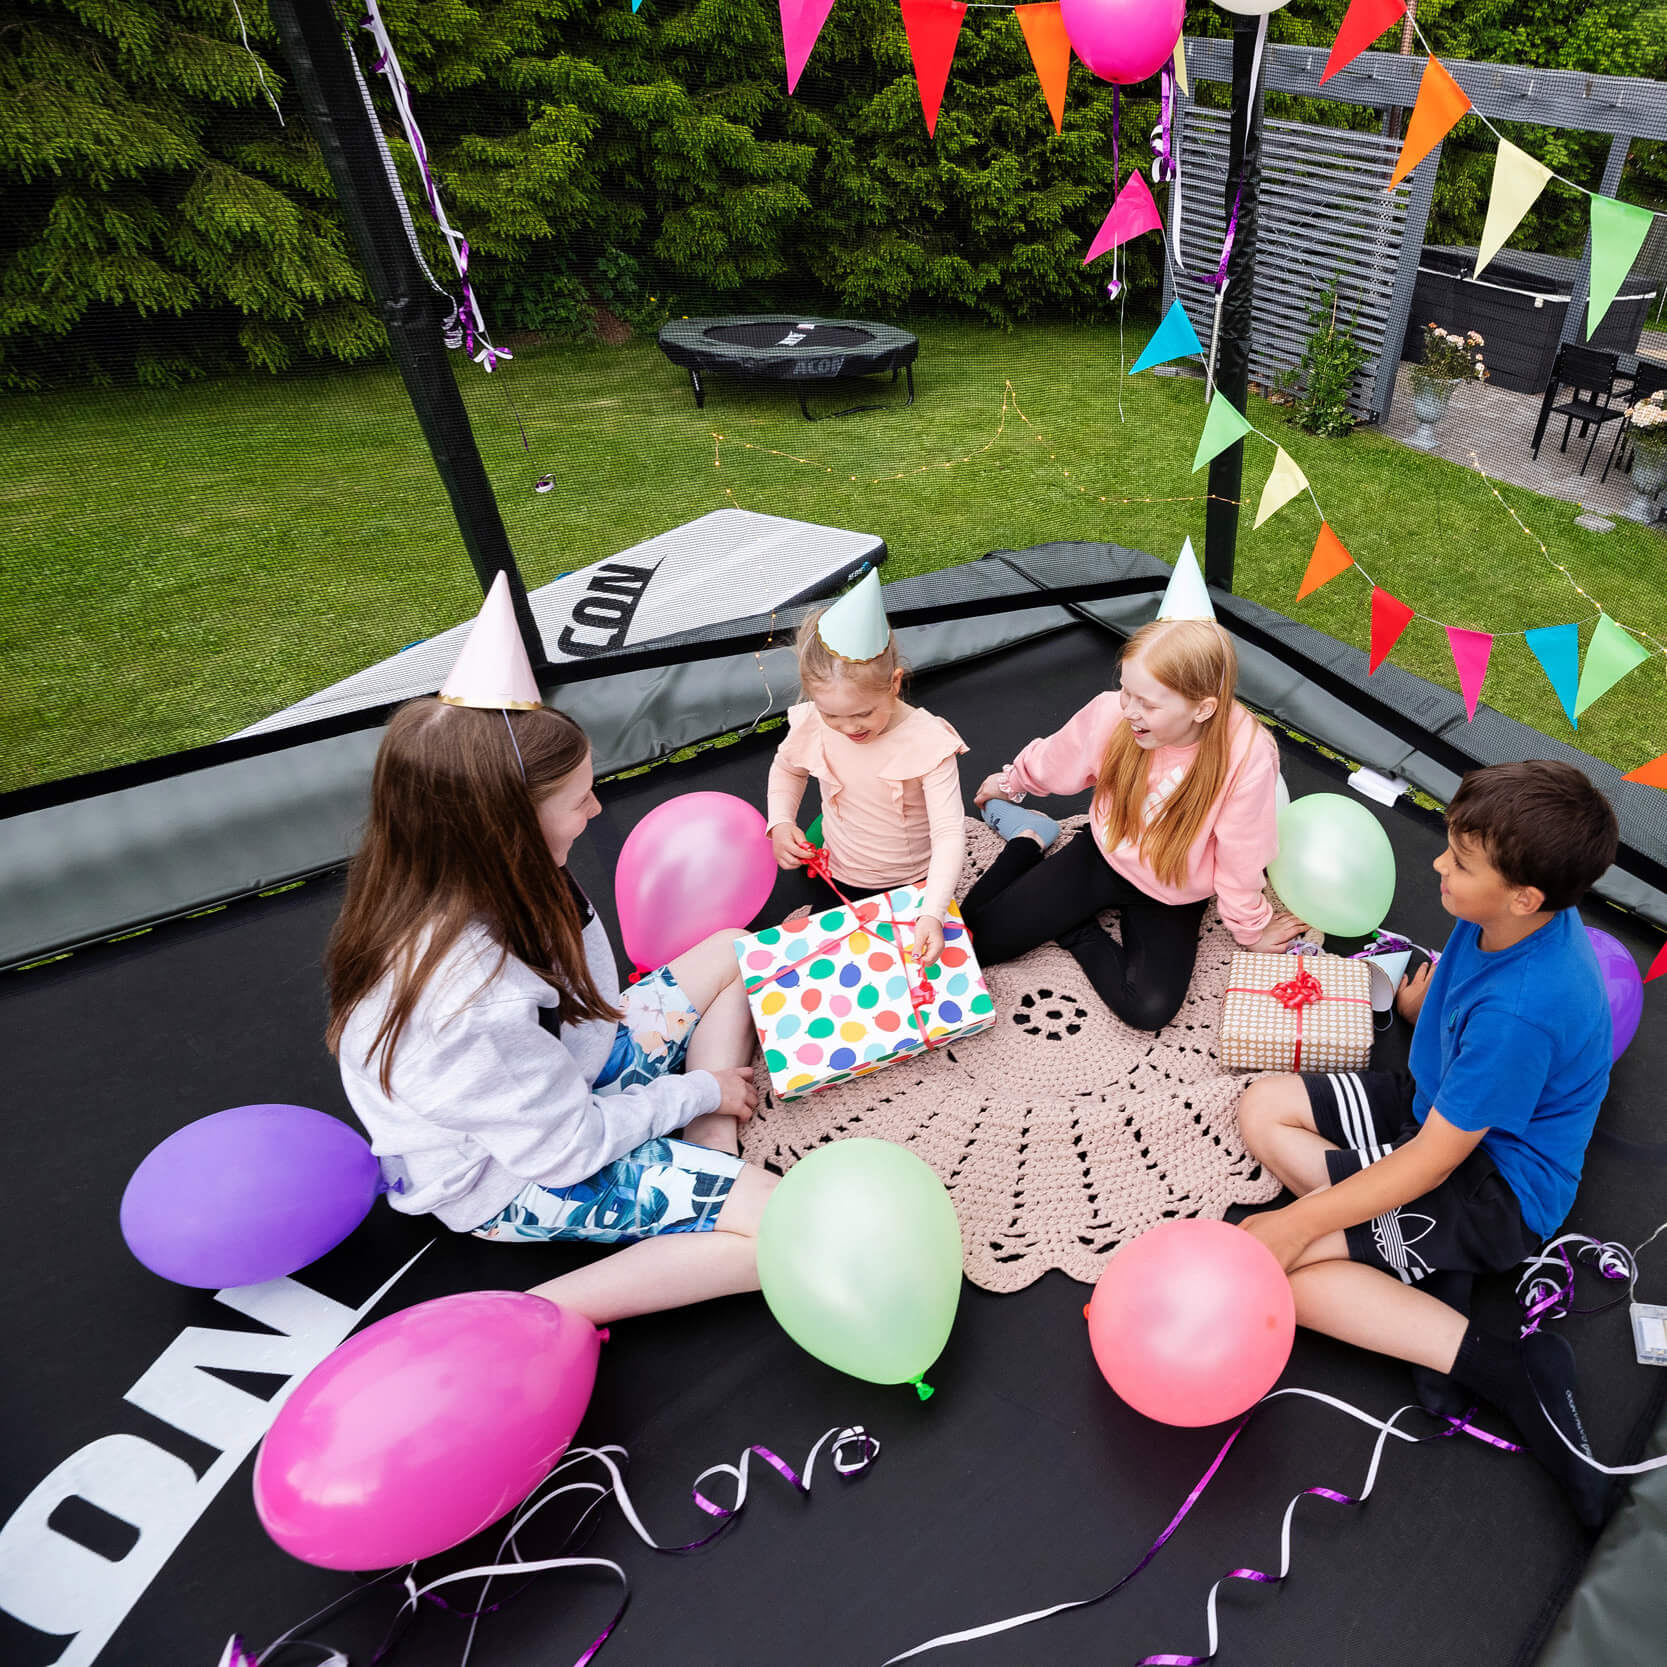 4 children celebrate a birthday party on a trampoline decorated with balloons and serpentine.